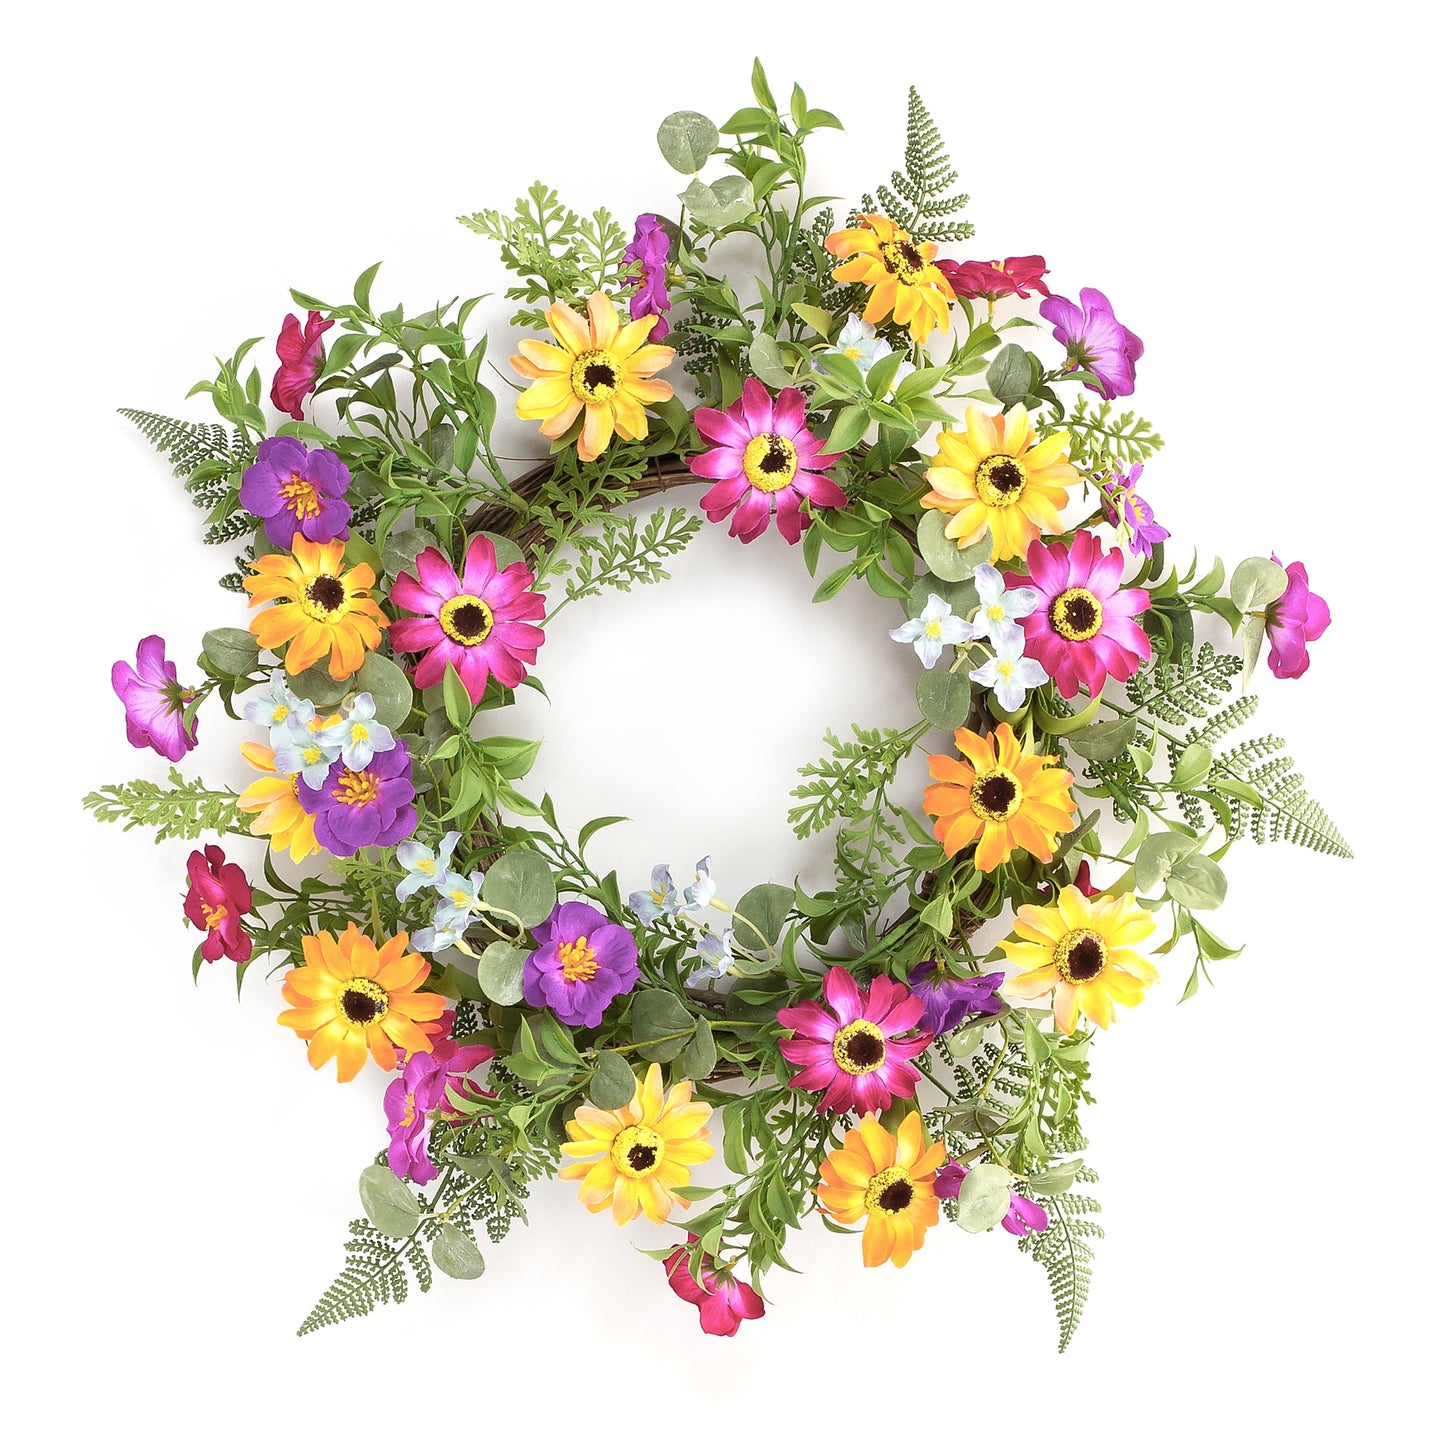 Mixed Fern and Daisy Wildflower Wreath 18"D